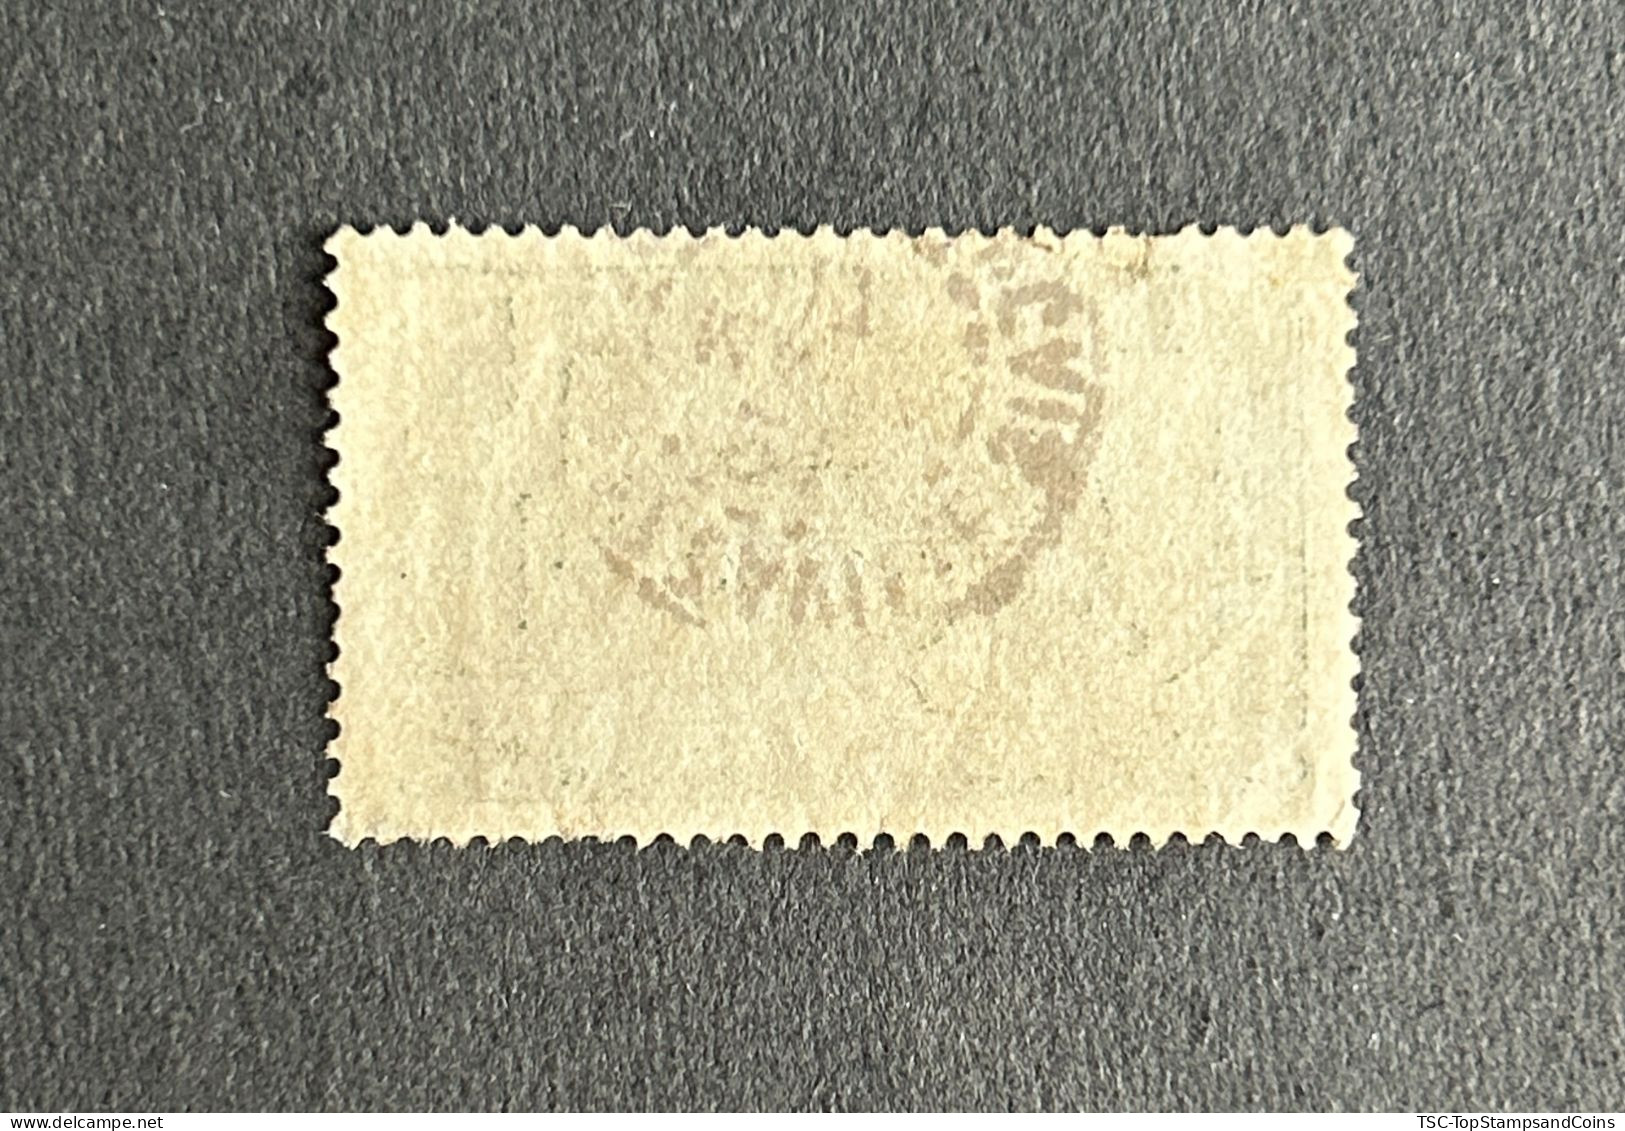 FRCG051UB - Leopard - 5 C Used Stamp - Middle Congo - 1907 - Used Stamps